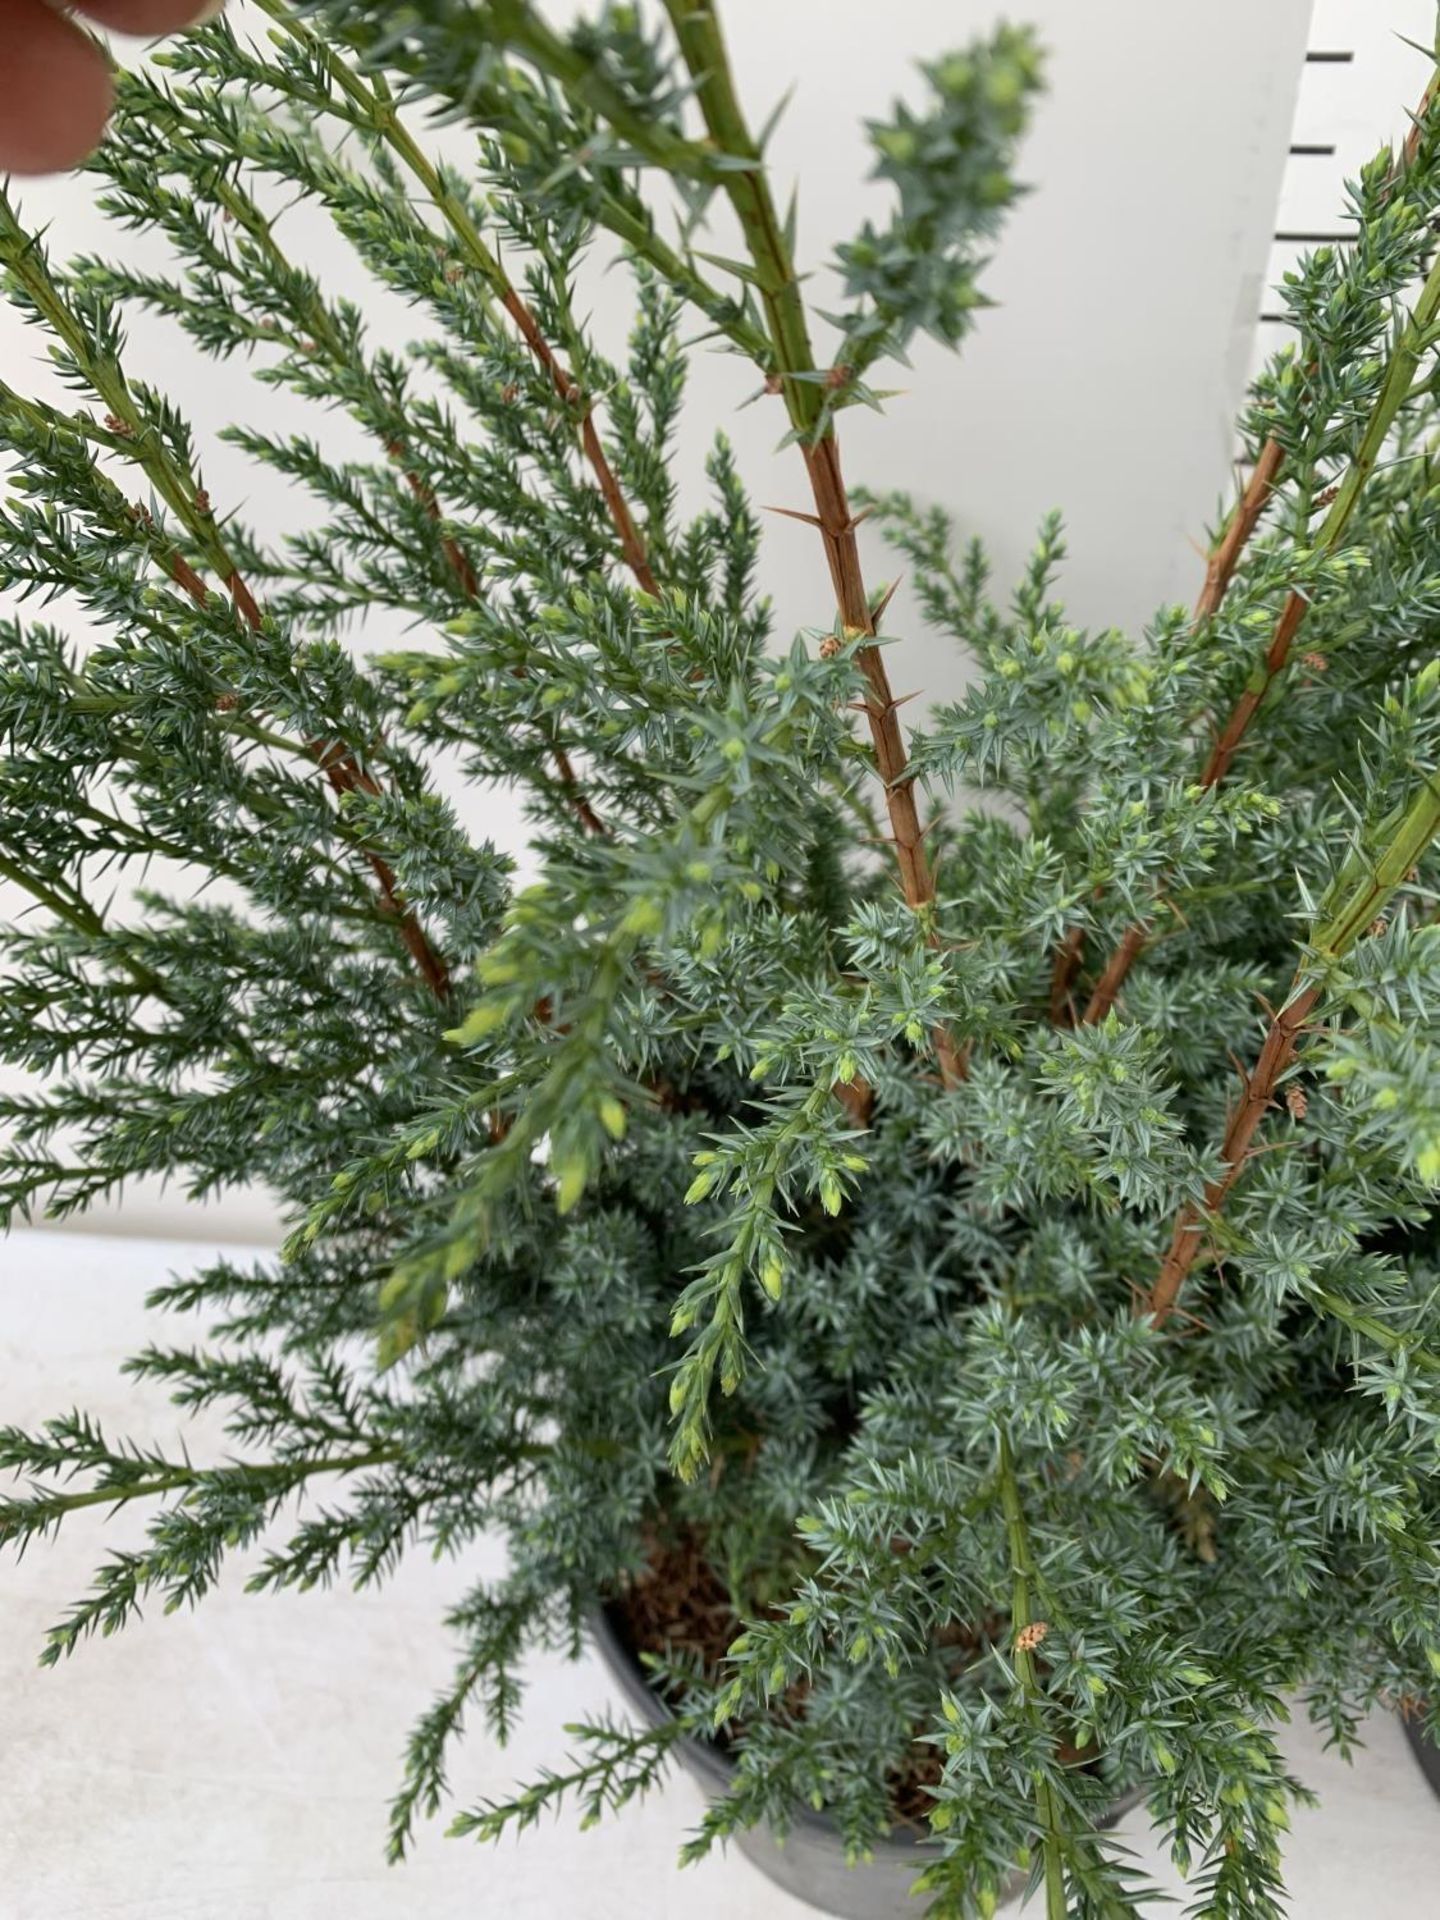 TWO JUNIPERUS CHINENSIS BLUE ALPS IN 7 LTR POTS A METRE IN HEIGHT PLUS VAT TO BE SOLD FOR THE TWO - Image 14 of 22